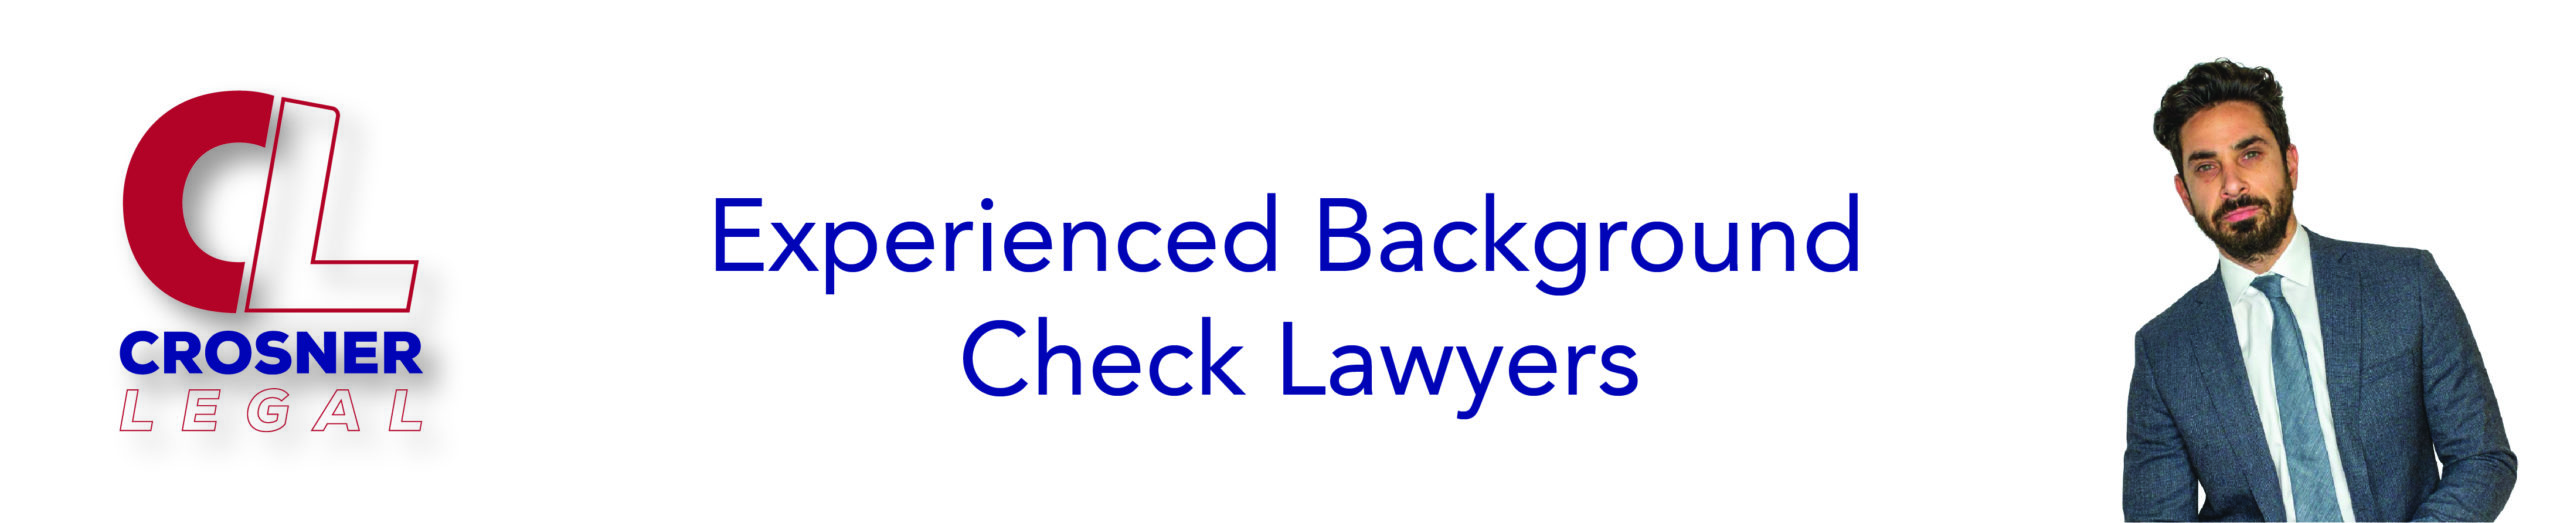 Experienced Background Check Lawyers